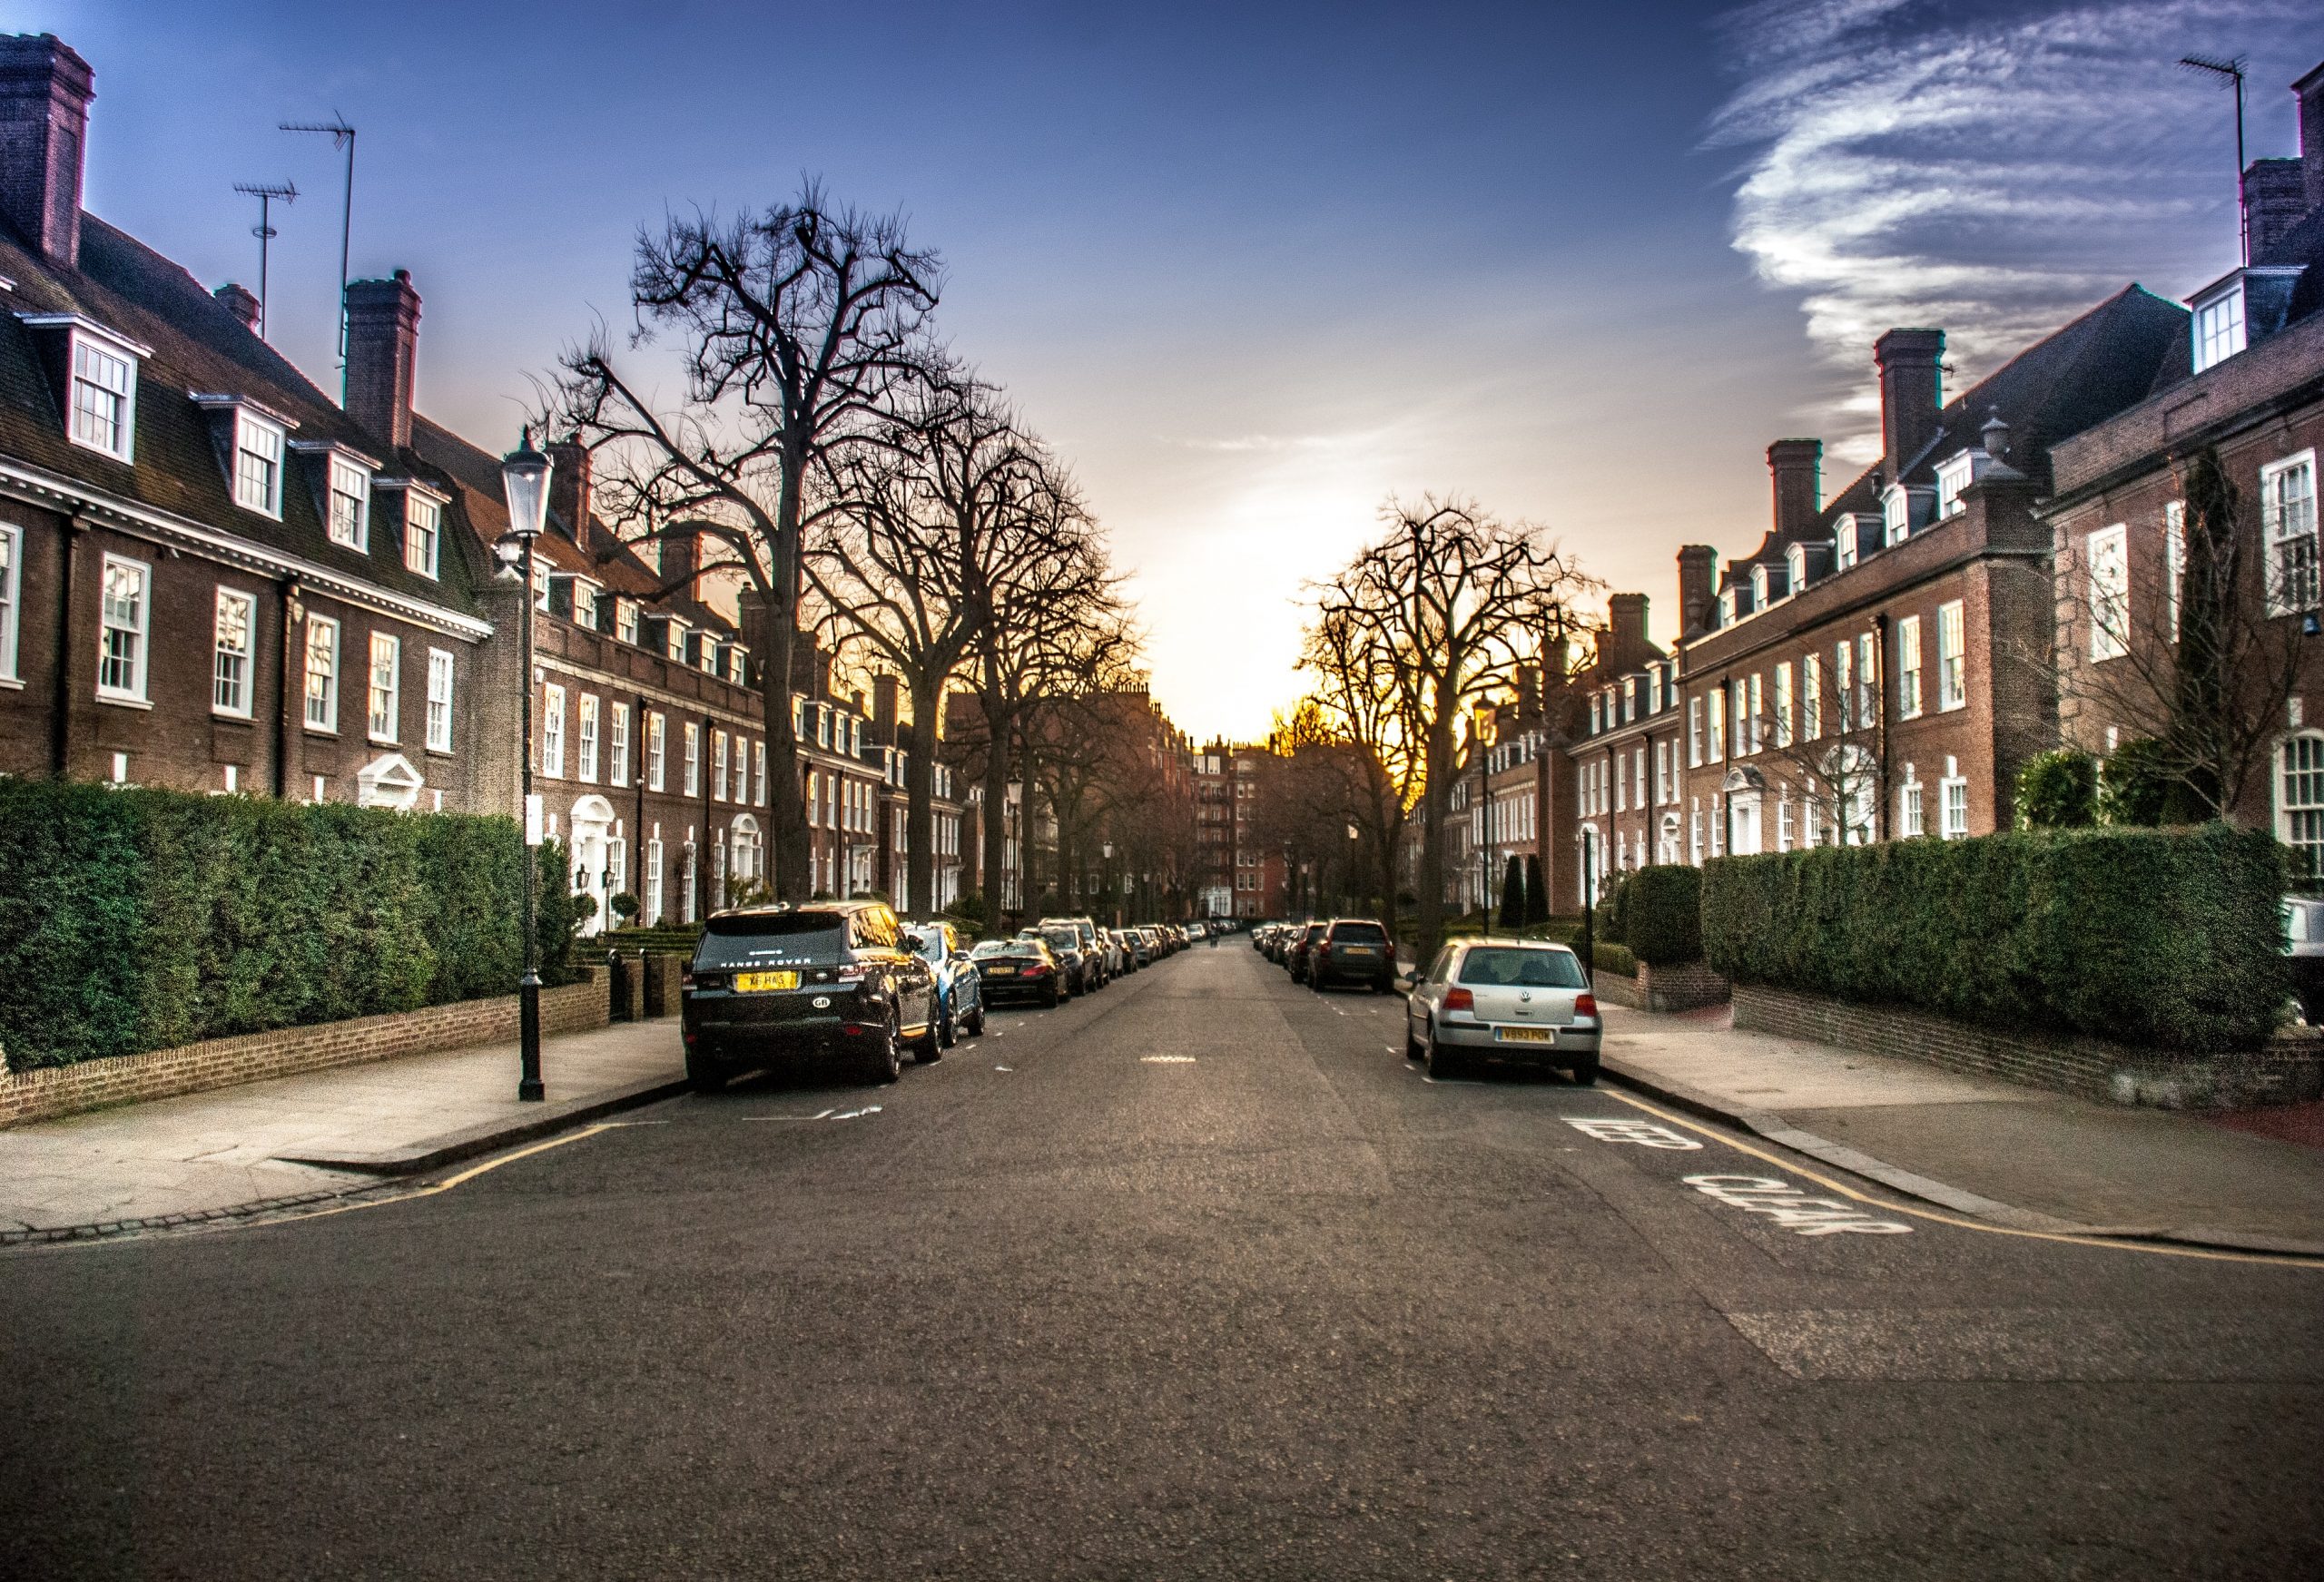 Two rows of brown houses facing each other, with cars lined up on each side of the road. The sun is setting and the trees on either side of the road are barren.